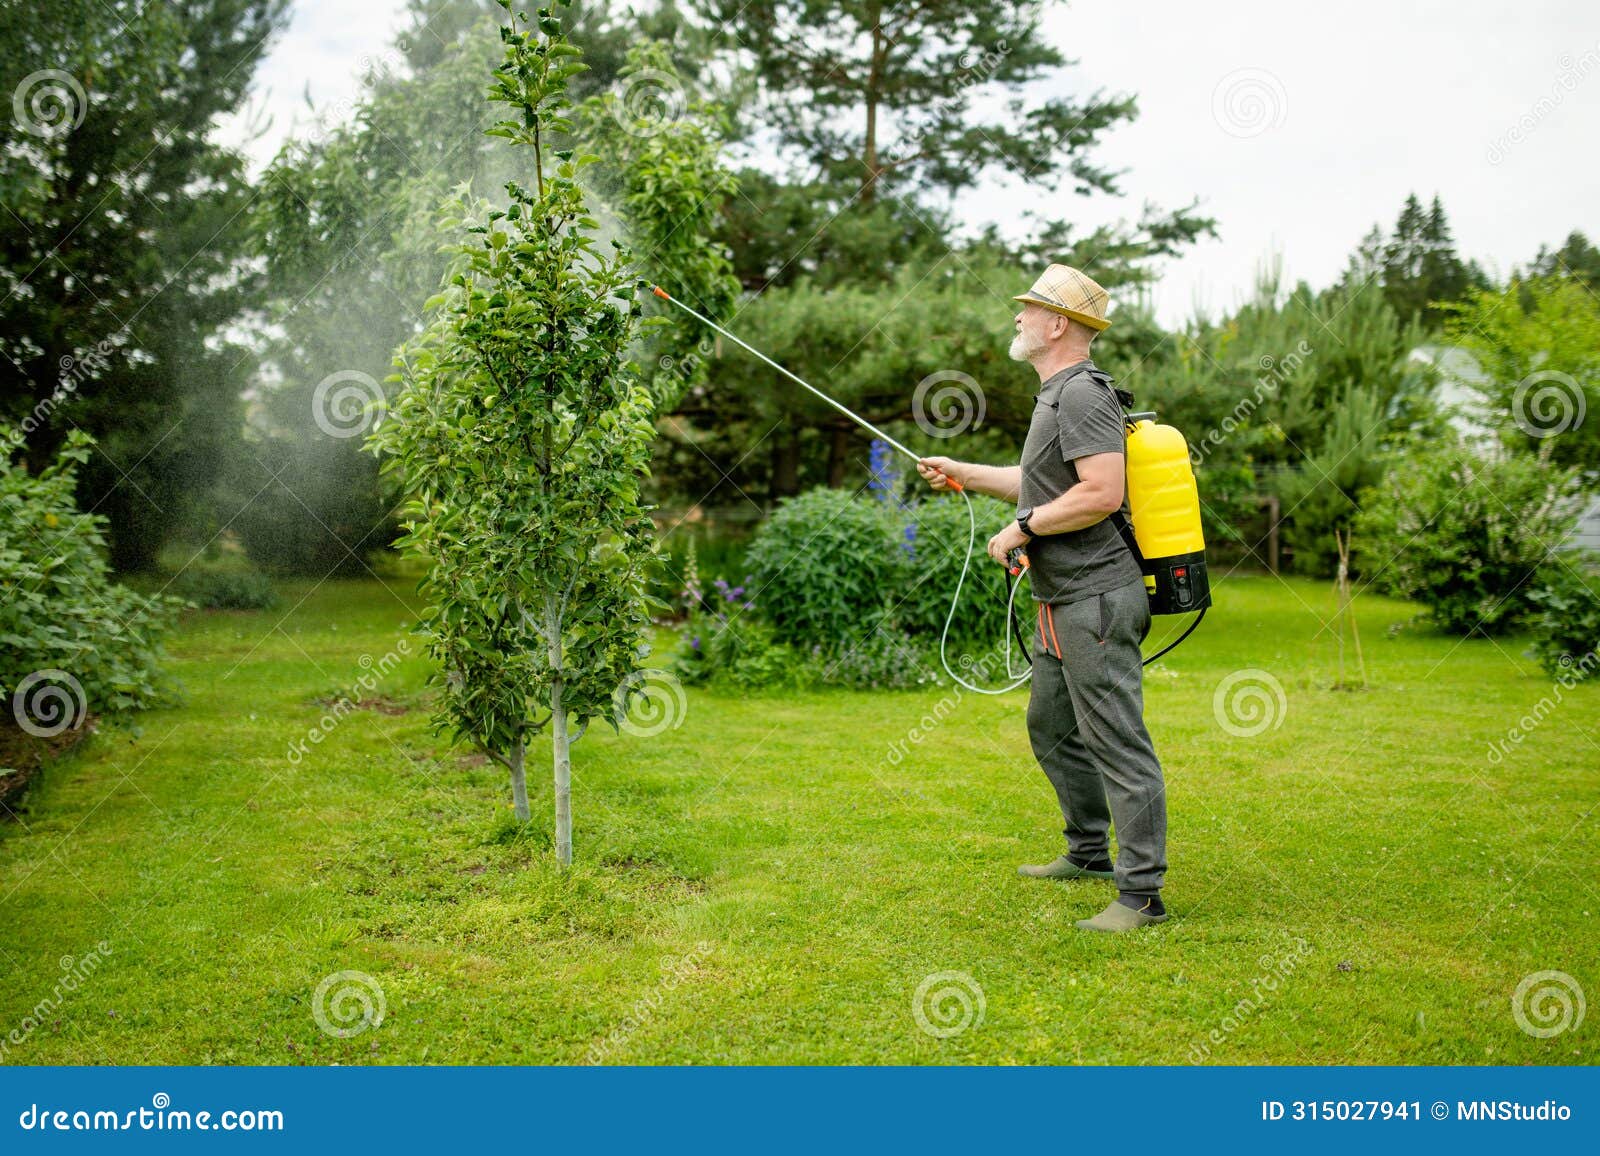 middle age gardener with a mist fogger sprayer sprays fungicide and pesticide on bushes and trees. protection of cultivated plants